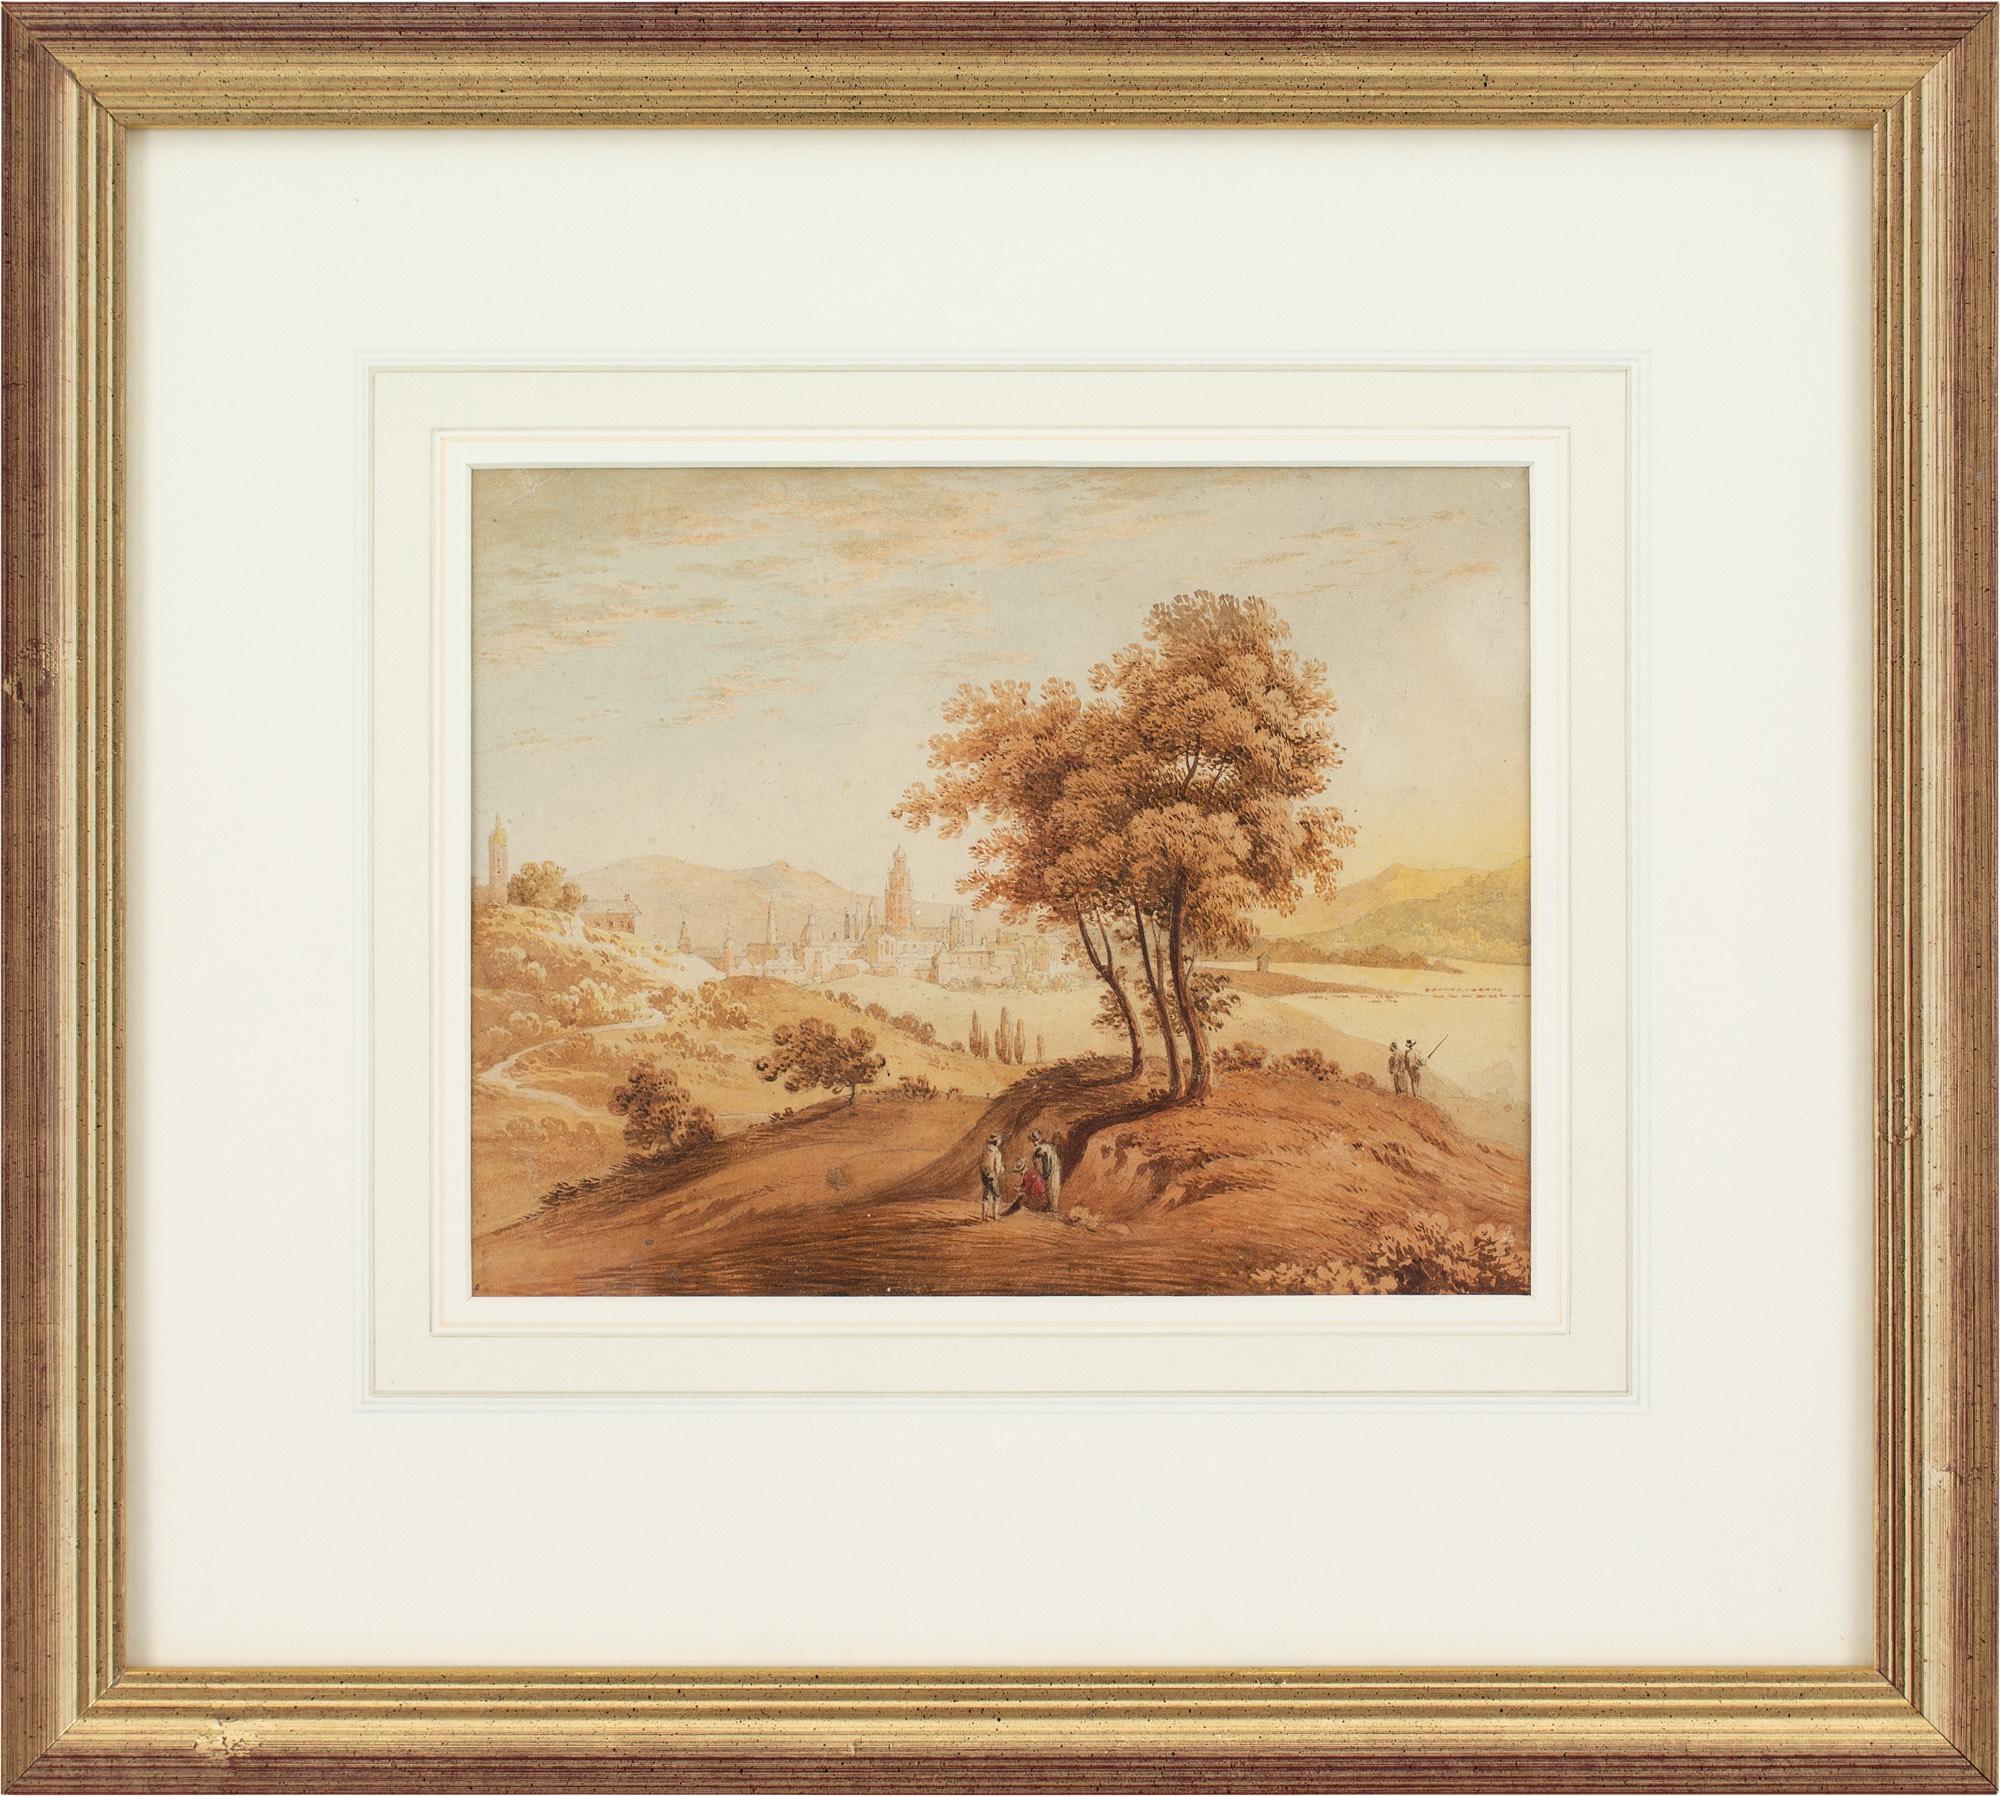 1830s Drawings and Watercolor Paintings